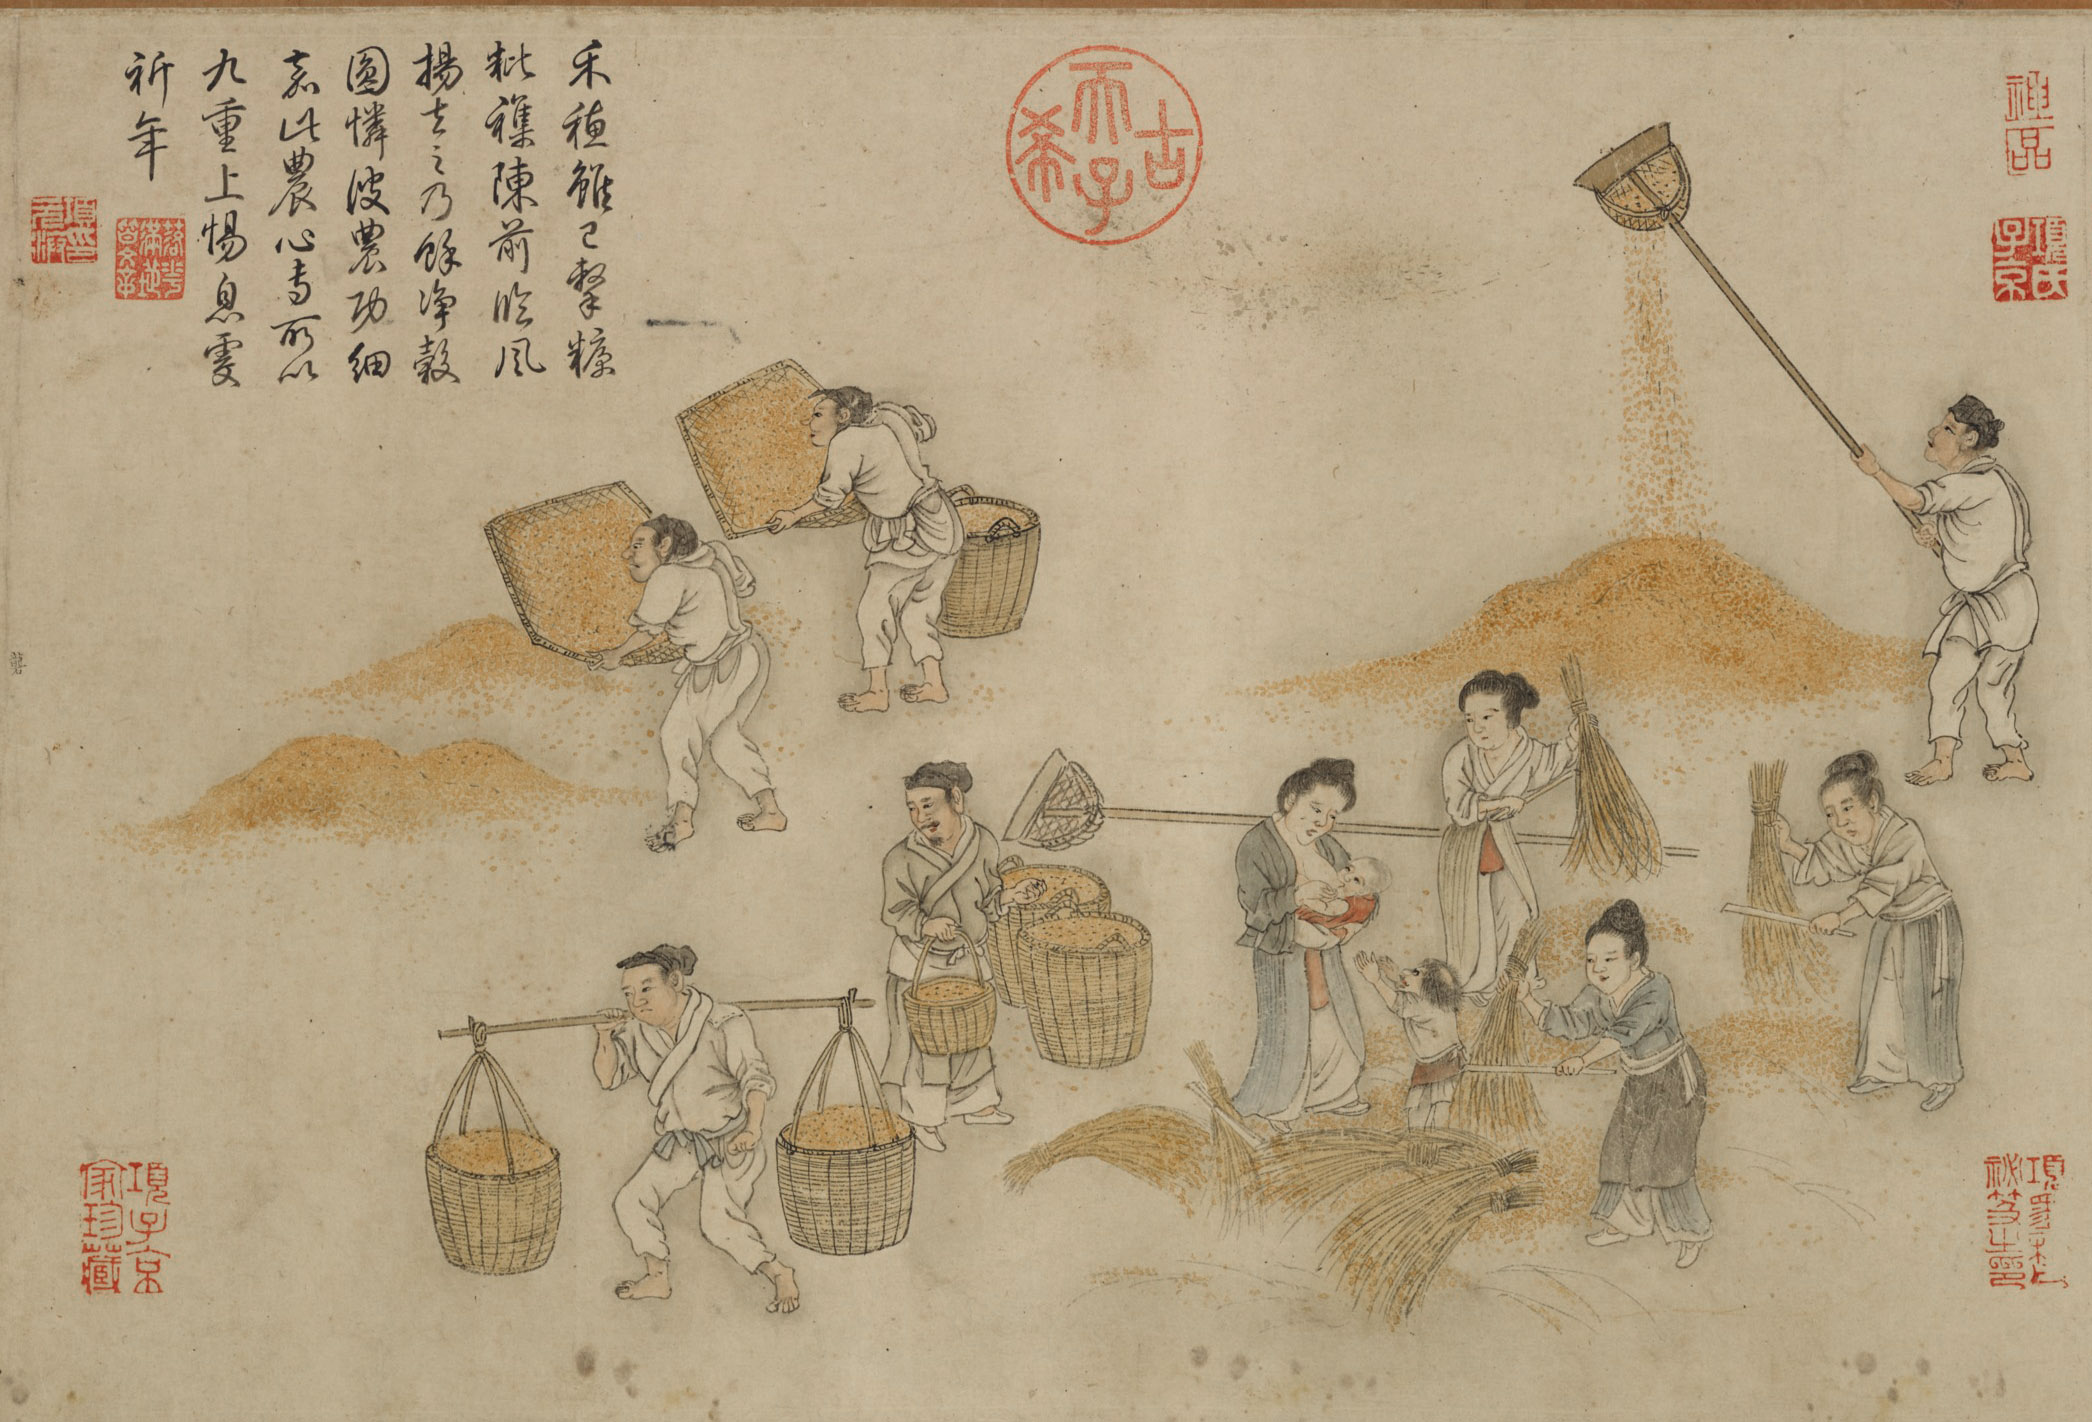 Attributed to Cheng Qi (傳)程棨 (active mid- to late 13th century) Formerly attributed to Liu Songnian (傳)劉松年 (ca. 1150-after 1225), Tilling Rice, after Lou Shou, Yuan dynasty, mid- to late 13th century, Ink and color on paper, China, 32.7 x 1049.8 cm (Freer Gallery of Art, Smithsonian Institution, Washington, DC: Purchase — Charles Lang Freer Endowment, F1954.21)